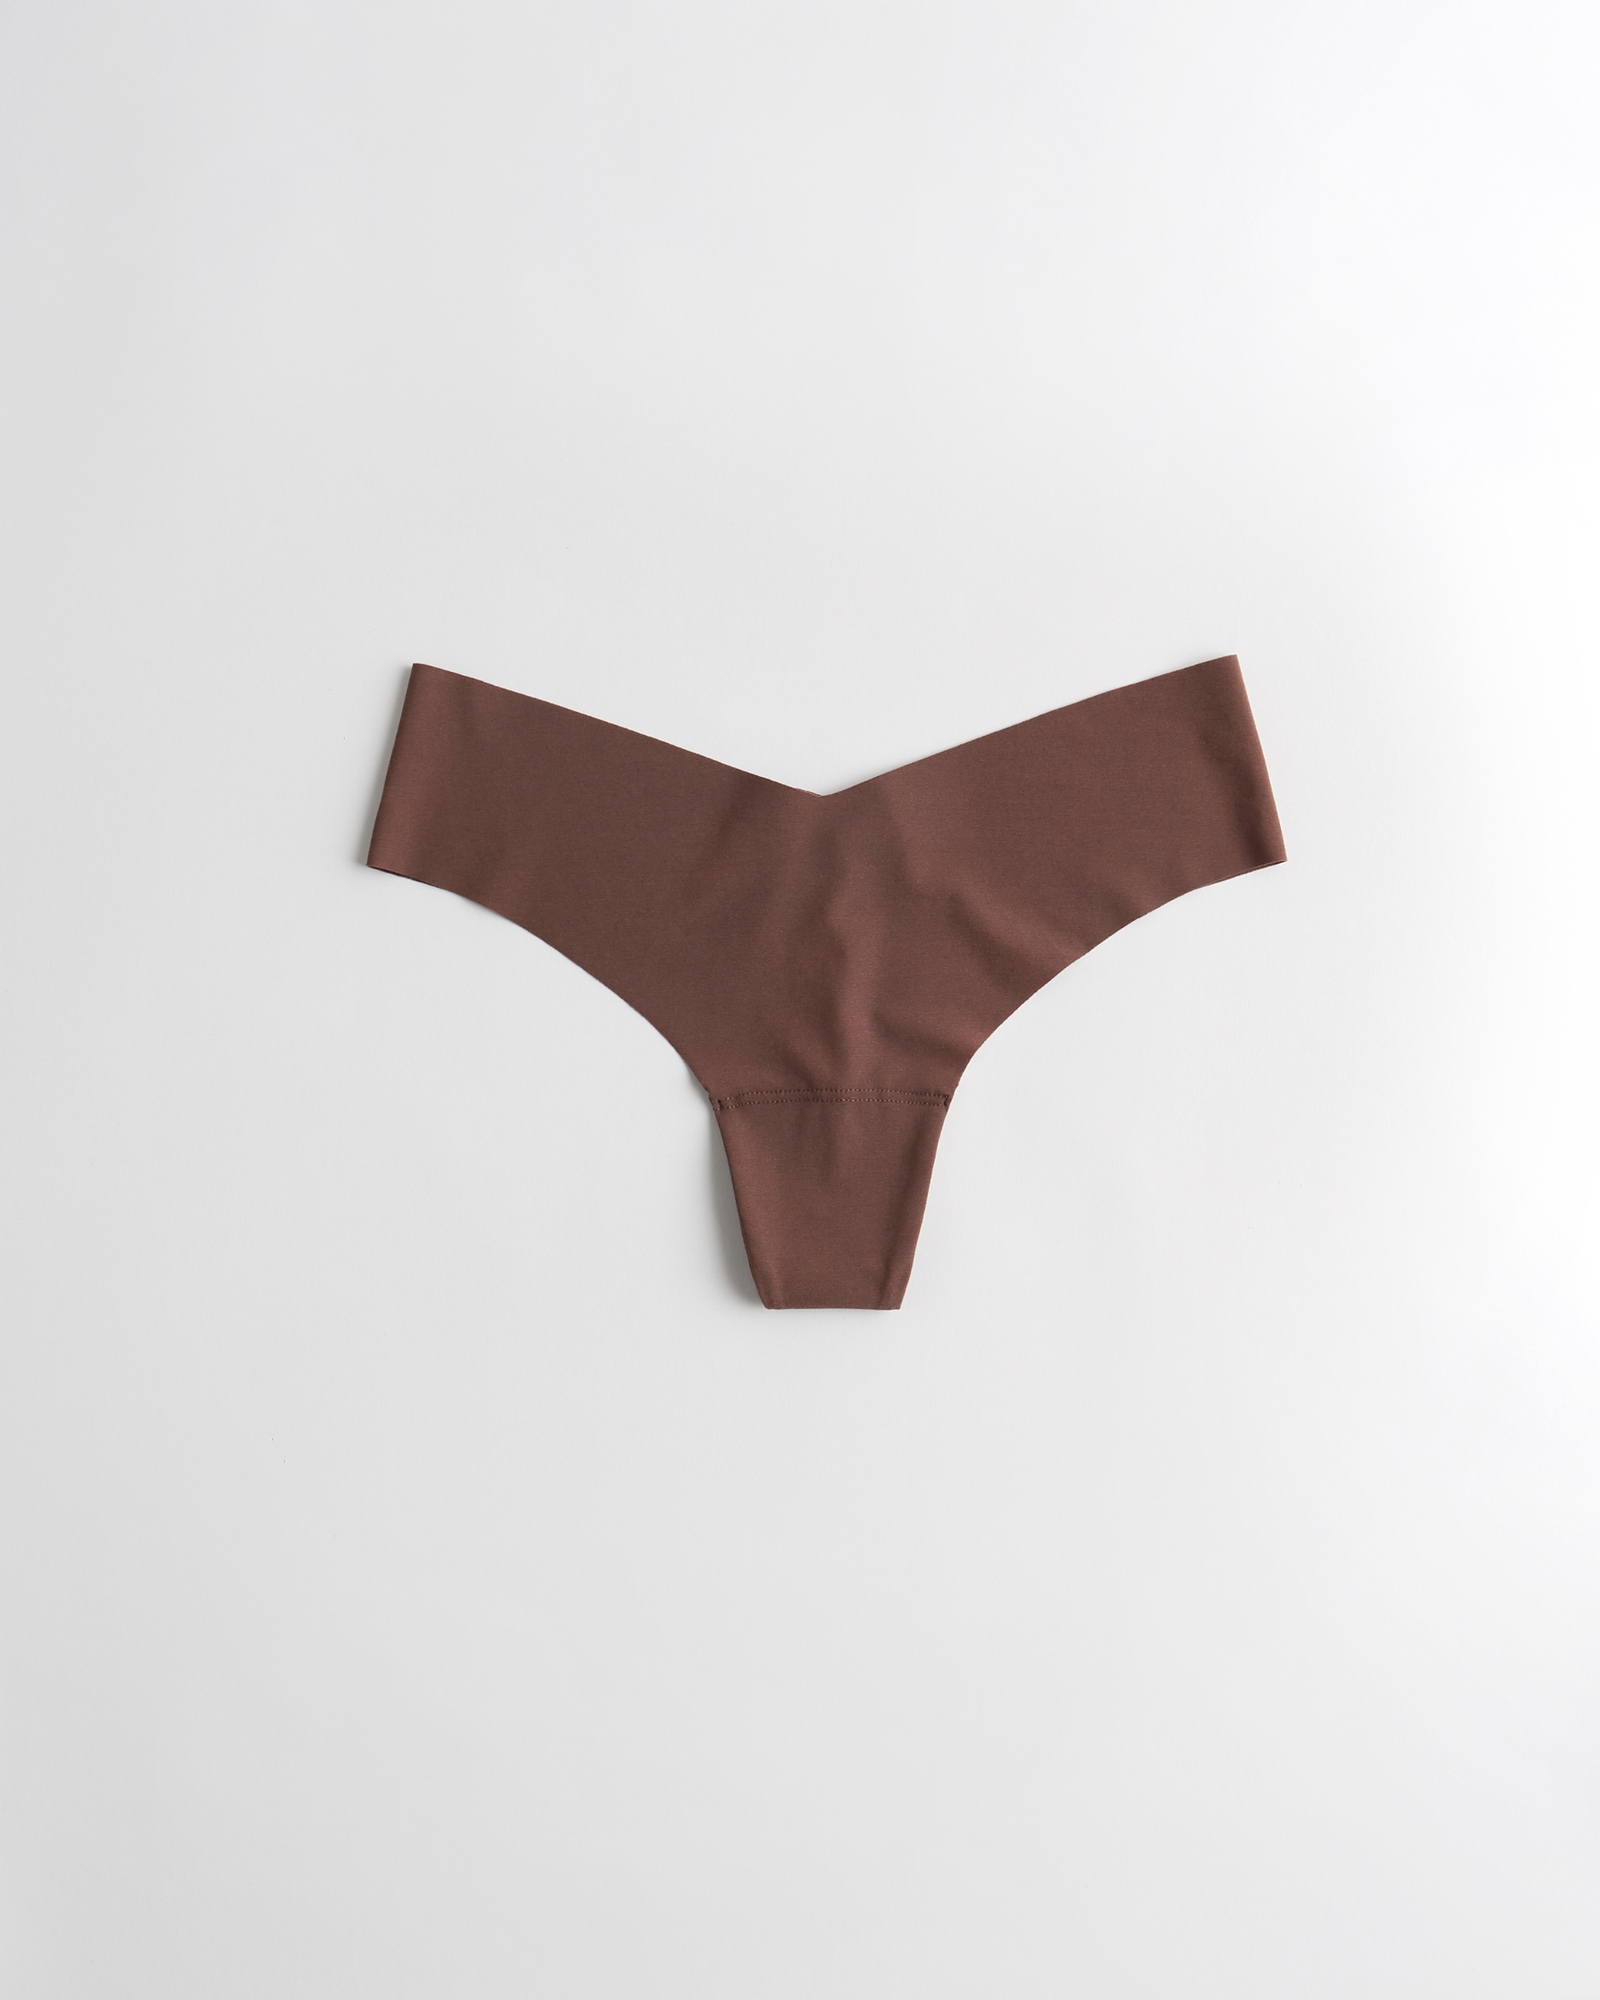 Hollister Gilly Hicks Lace No-Show Thong Underwear